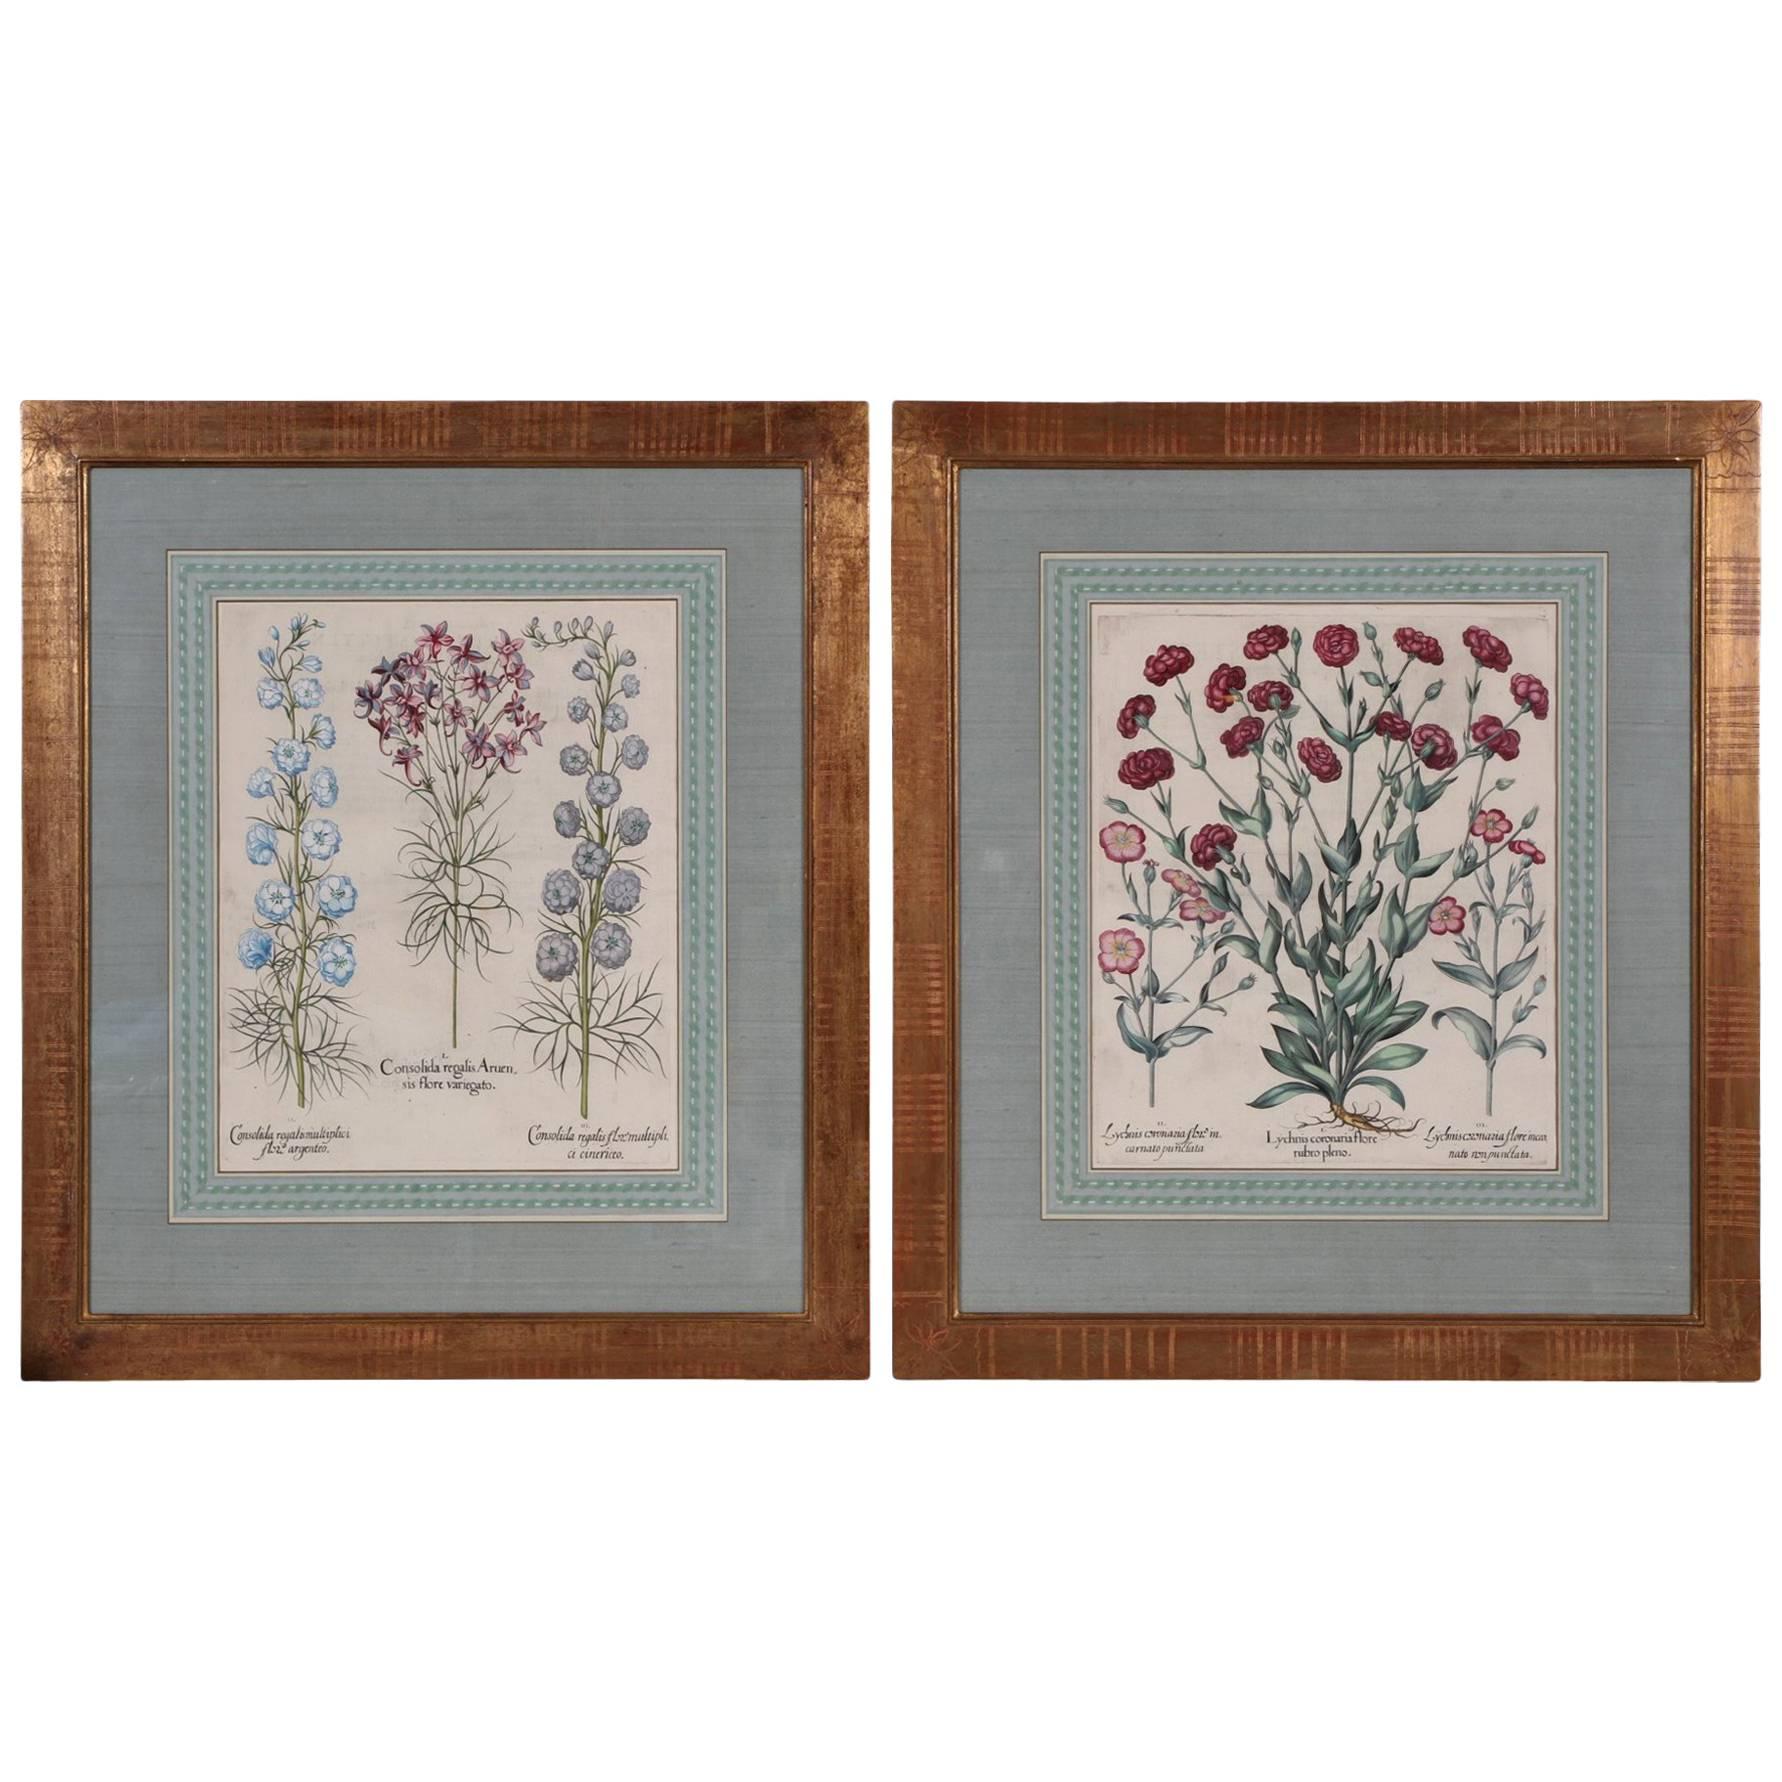 Pair of Early 17th Century Hand-Colored Folio Botanicals by Basil Besler